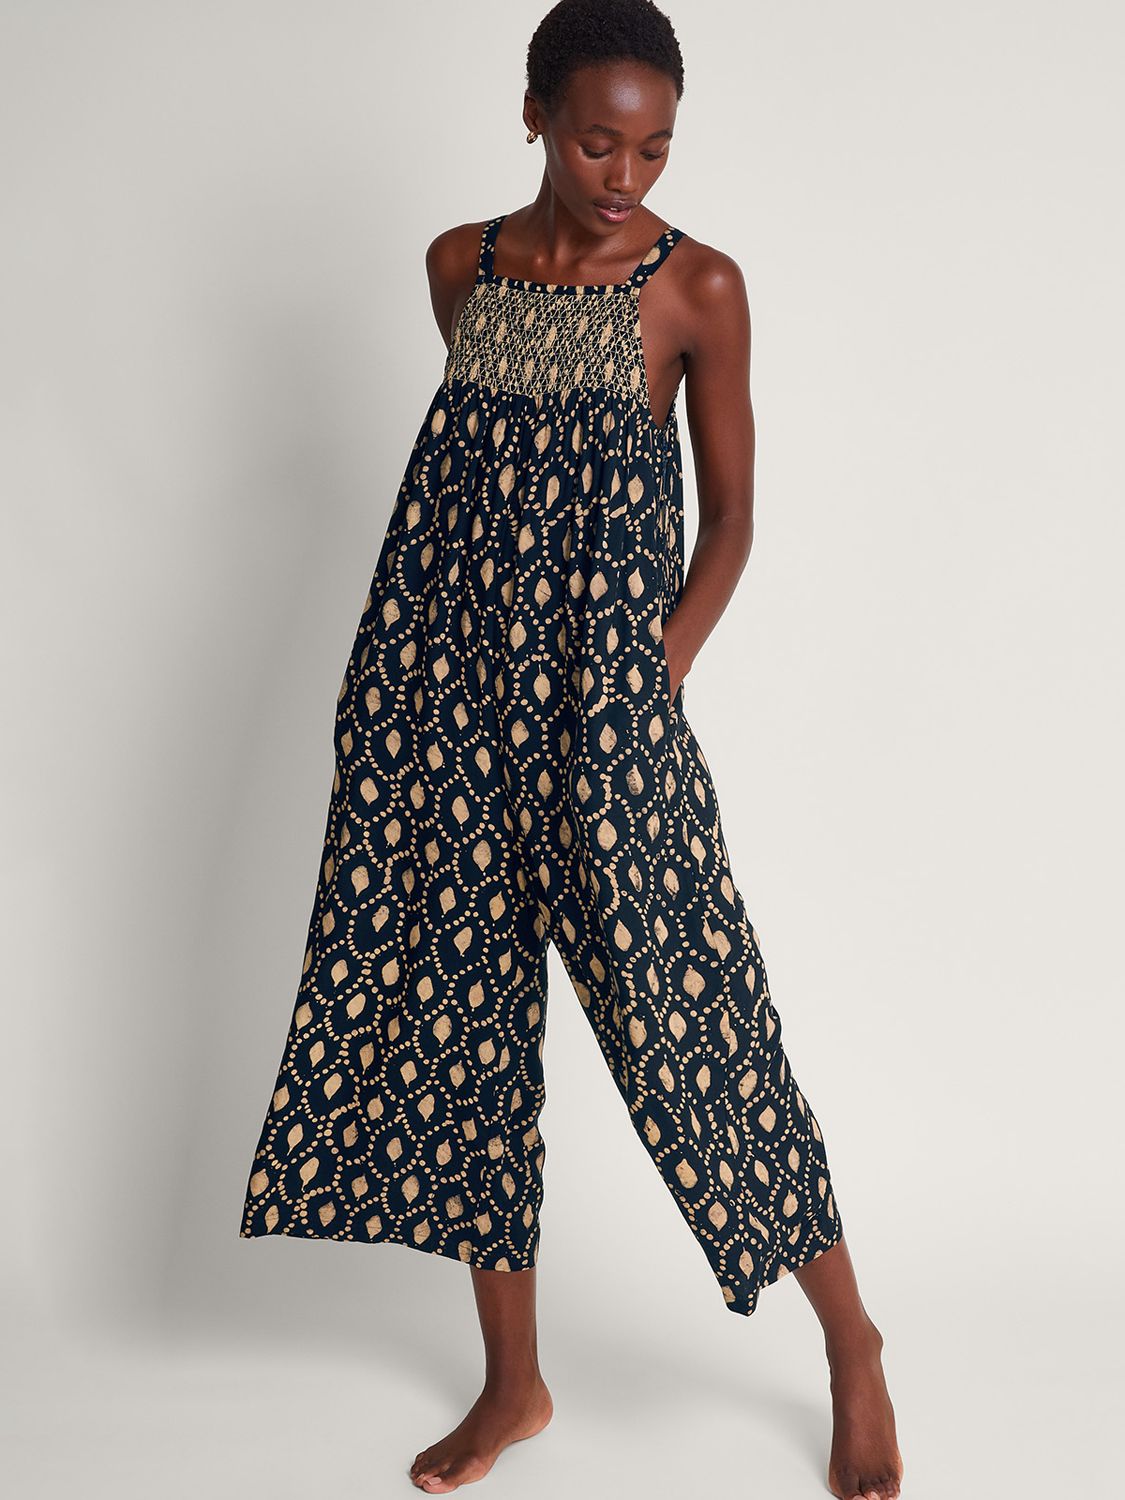 Women's Jumpsuits & Playsuits - Cropped